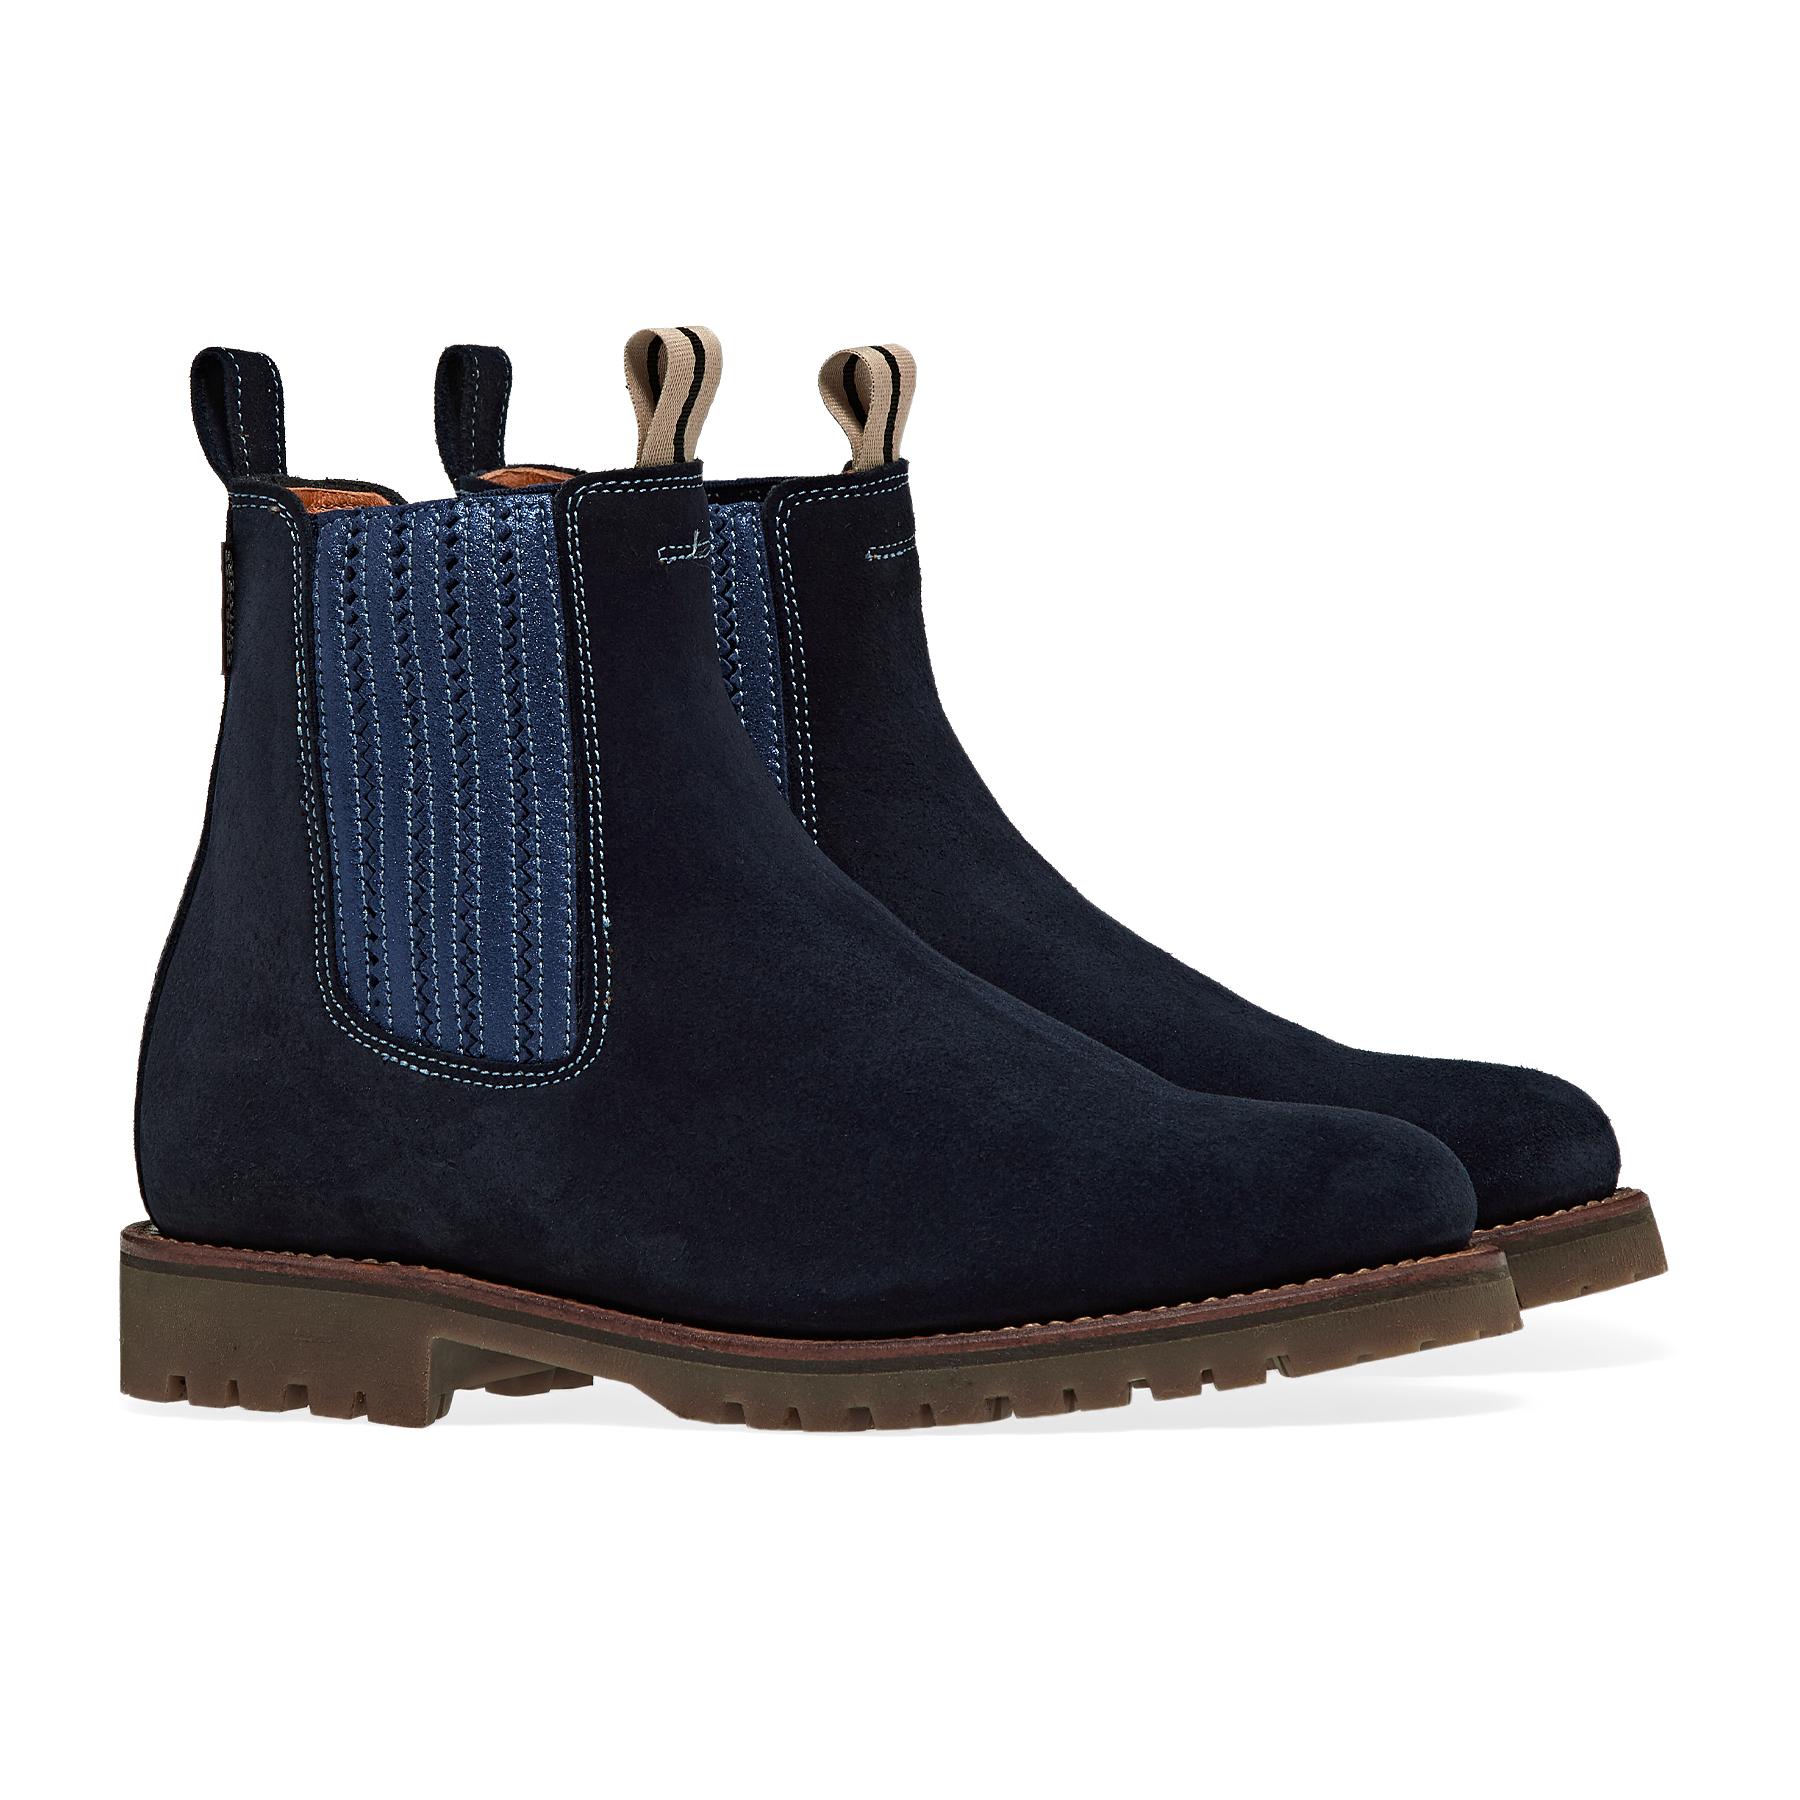 Penelope Chilvers Oscar Degrade Suede Boots in Blue | Lyst